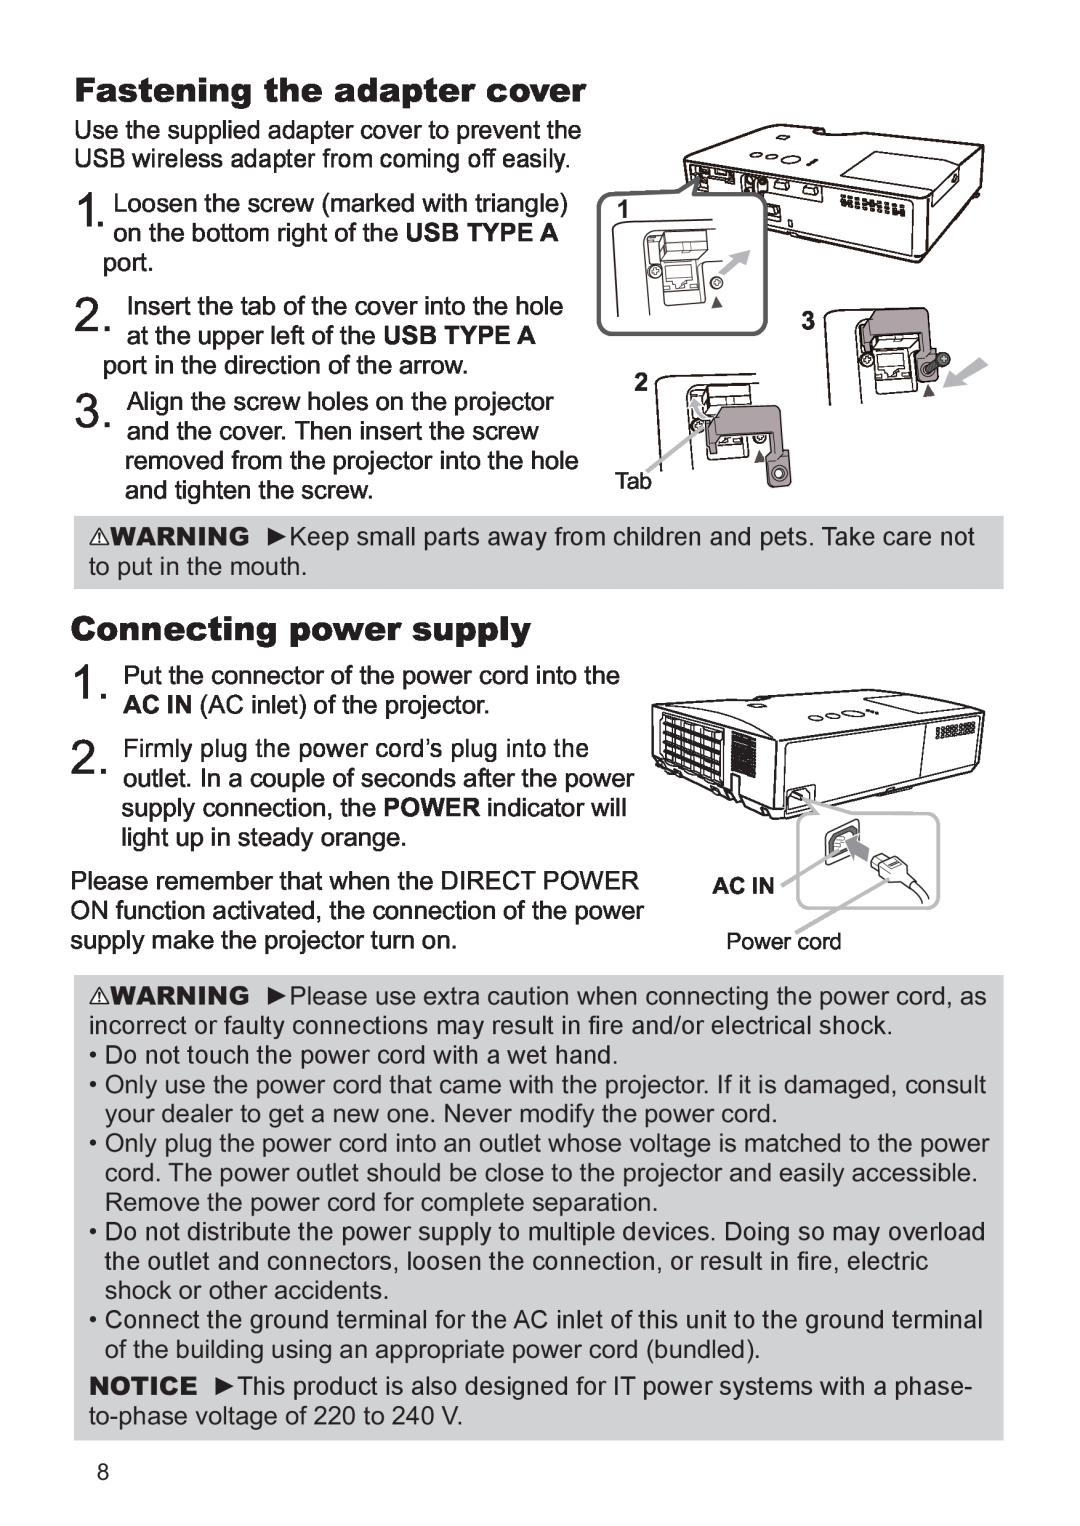 Hitachi CP-X2521WN, CP-X3021WN user manual Connecting power supply, Fastening the adapter cover, 1 3 2 